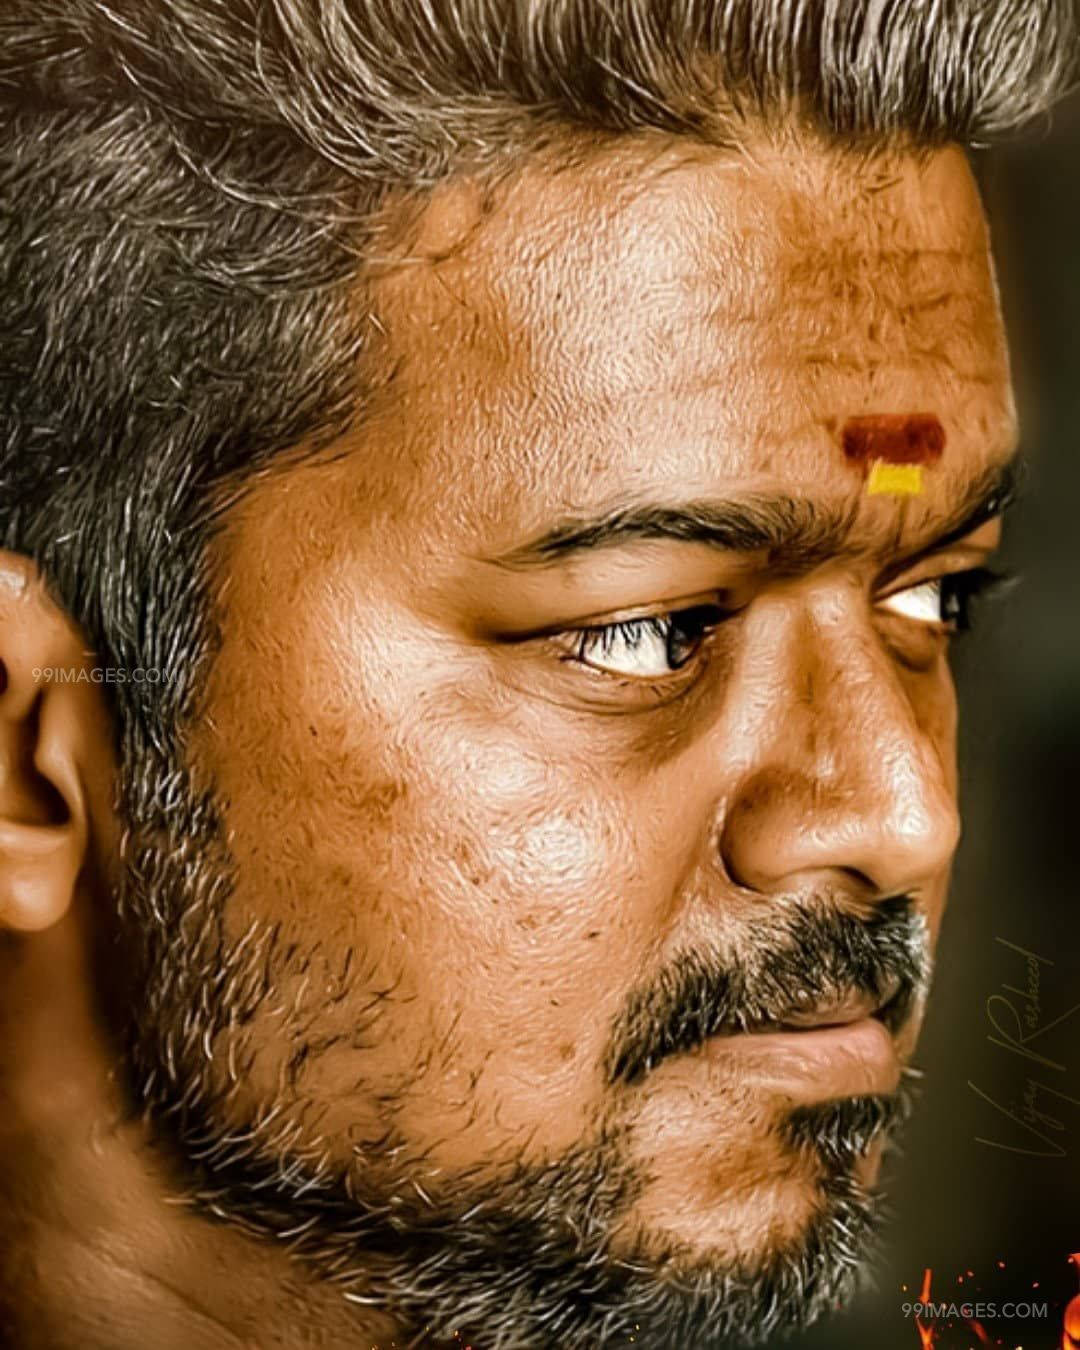 Thalapathy HD Barfacede tapeter Wallpaper